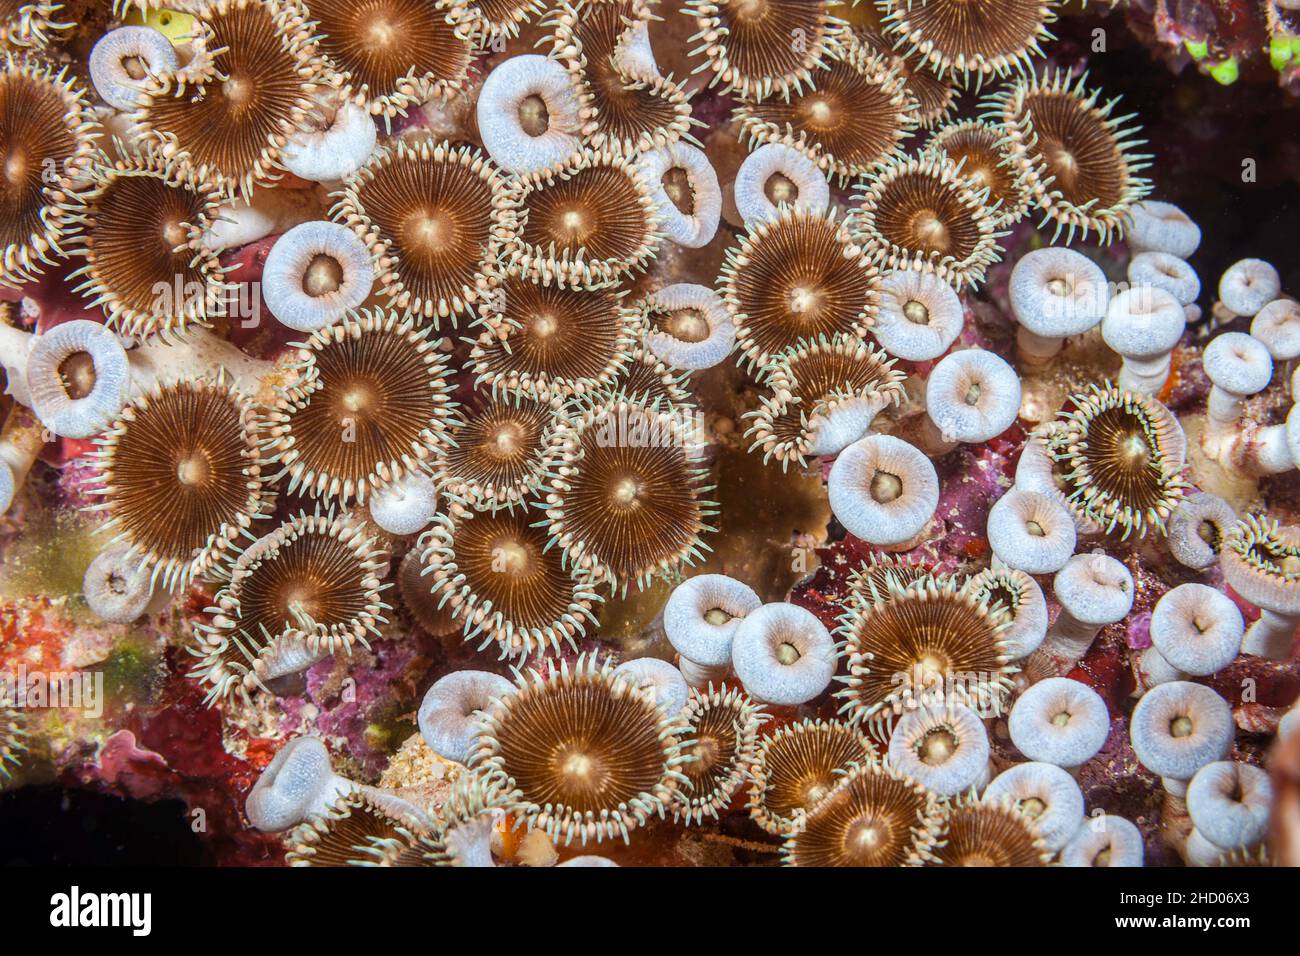 Colonial zoanthids, Protopalythoa sp, are often mistaken for anemones of which they are closely related, Fiji. Stock Photo